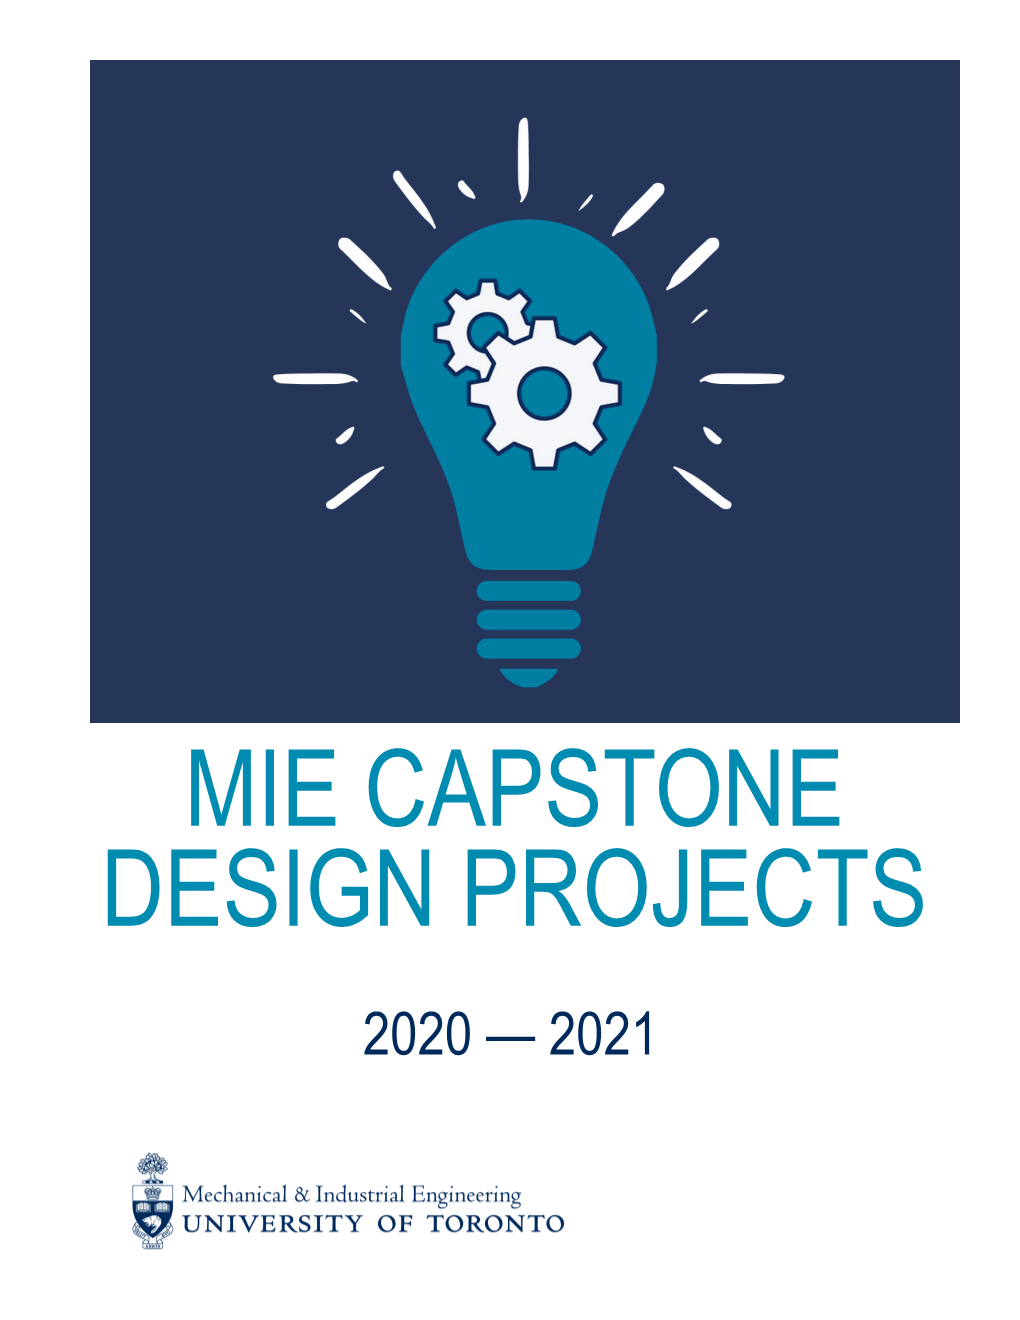 Mie Capstone Design Projects